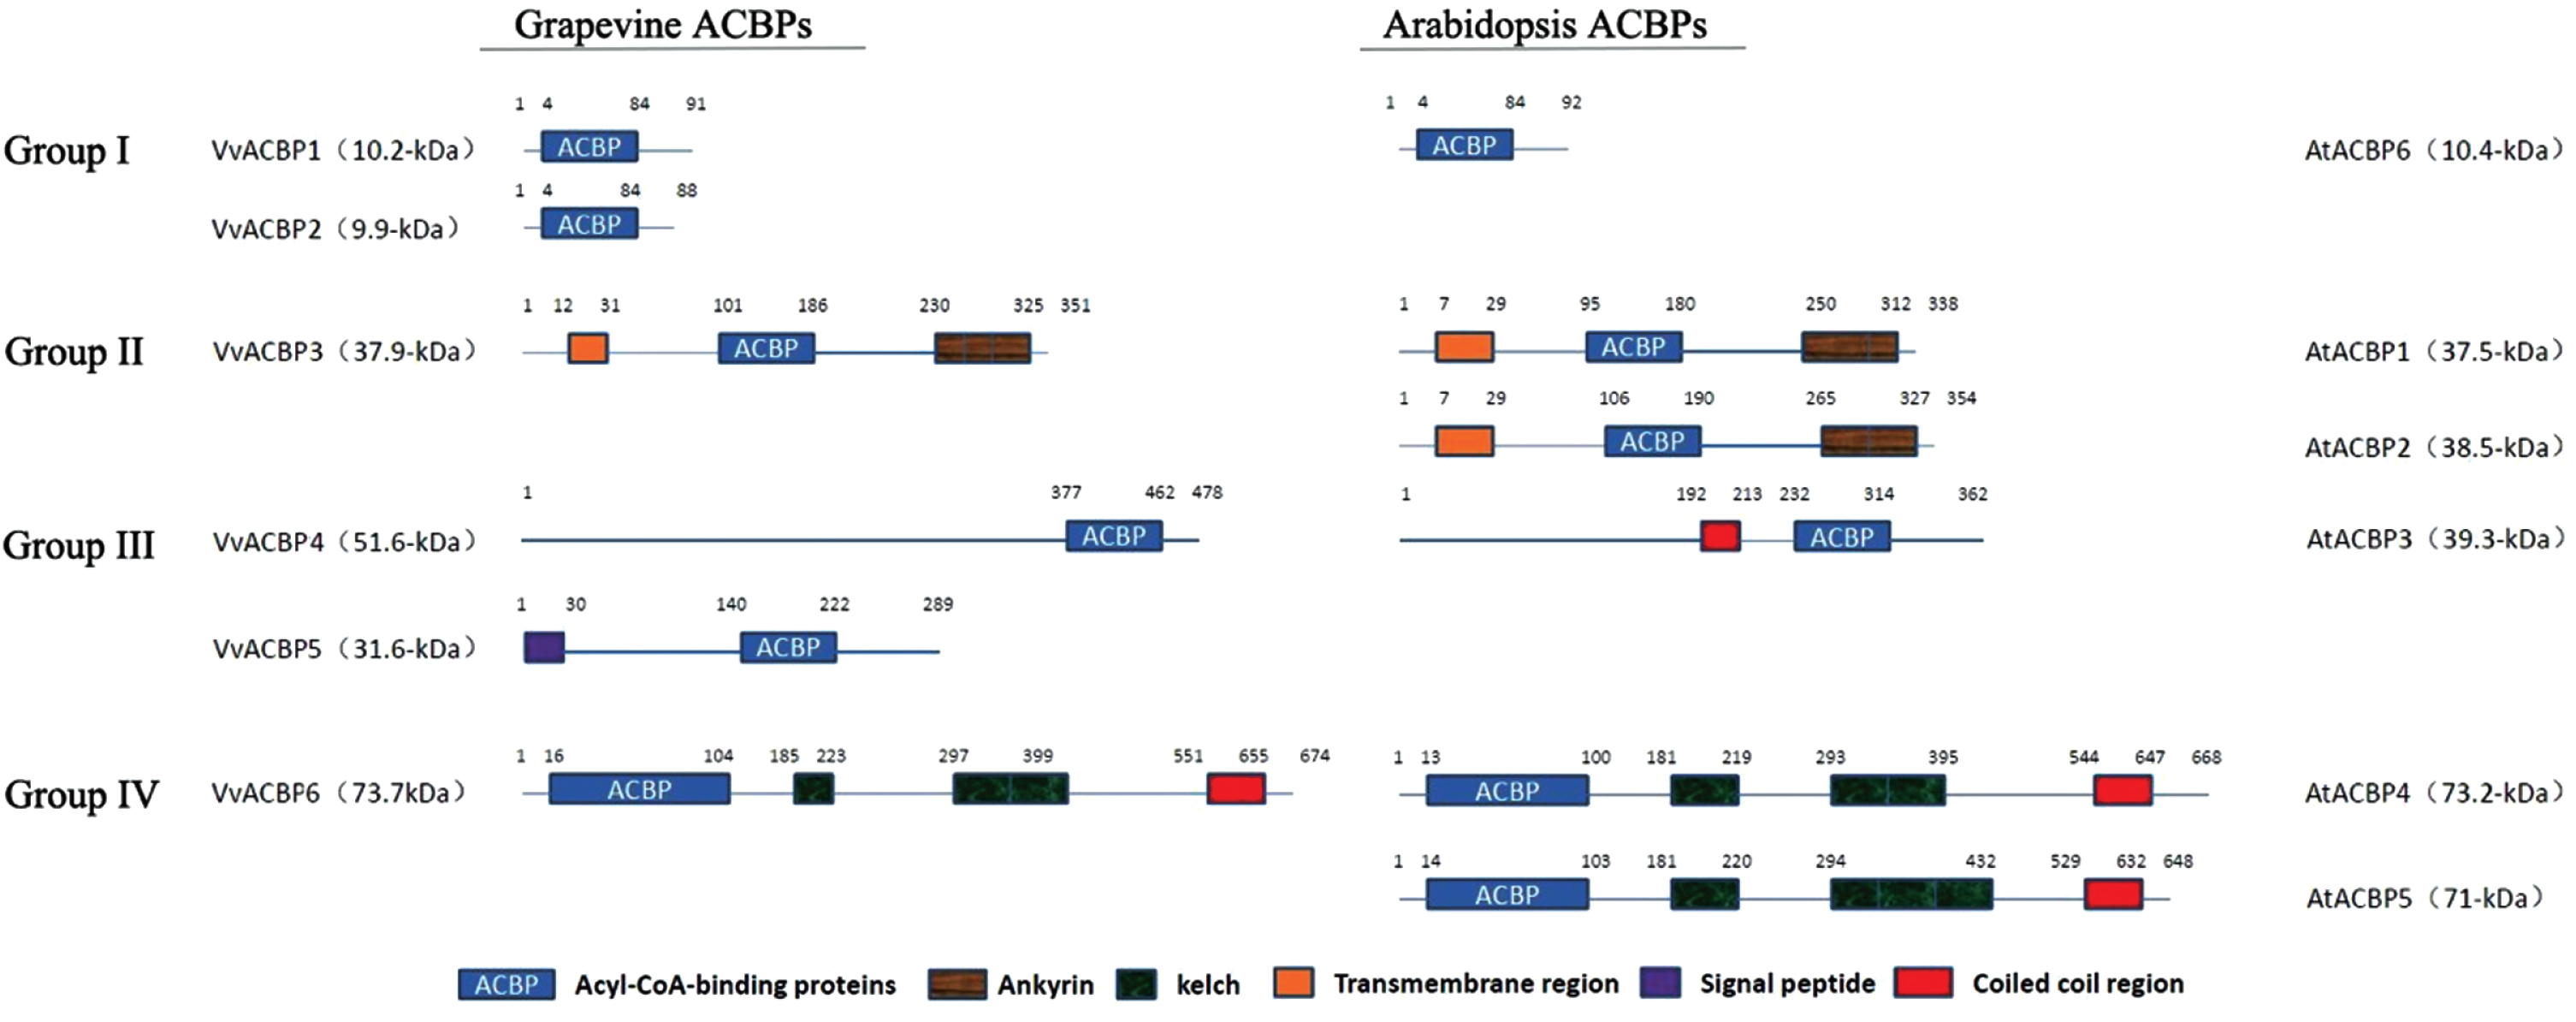 Comparison in architecture of the grape and Arabidopsis acyl-CoA-binding protein(ACBP) families. The ACB domain, ankyrin repeats, kelch motifs, putative transmembrane region, signal peptide and coiled coil region are shown. Six grape ACBPs are designated as VvACBP1-VvACBP6 (protein size indicated in the brackets). Arabidopsis ACBPs are designated as AtACBP1-AtACBP6.